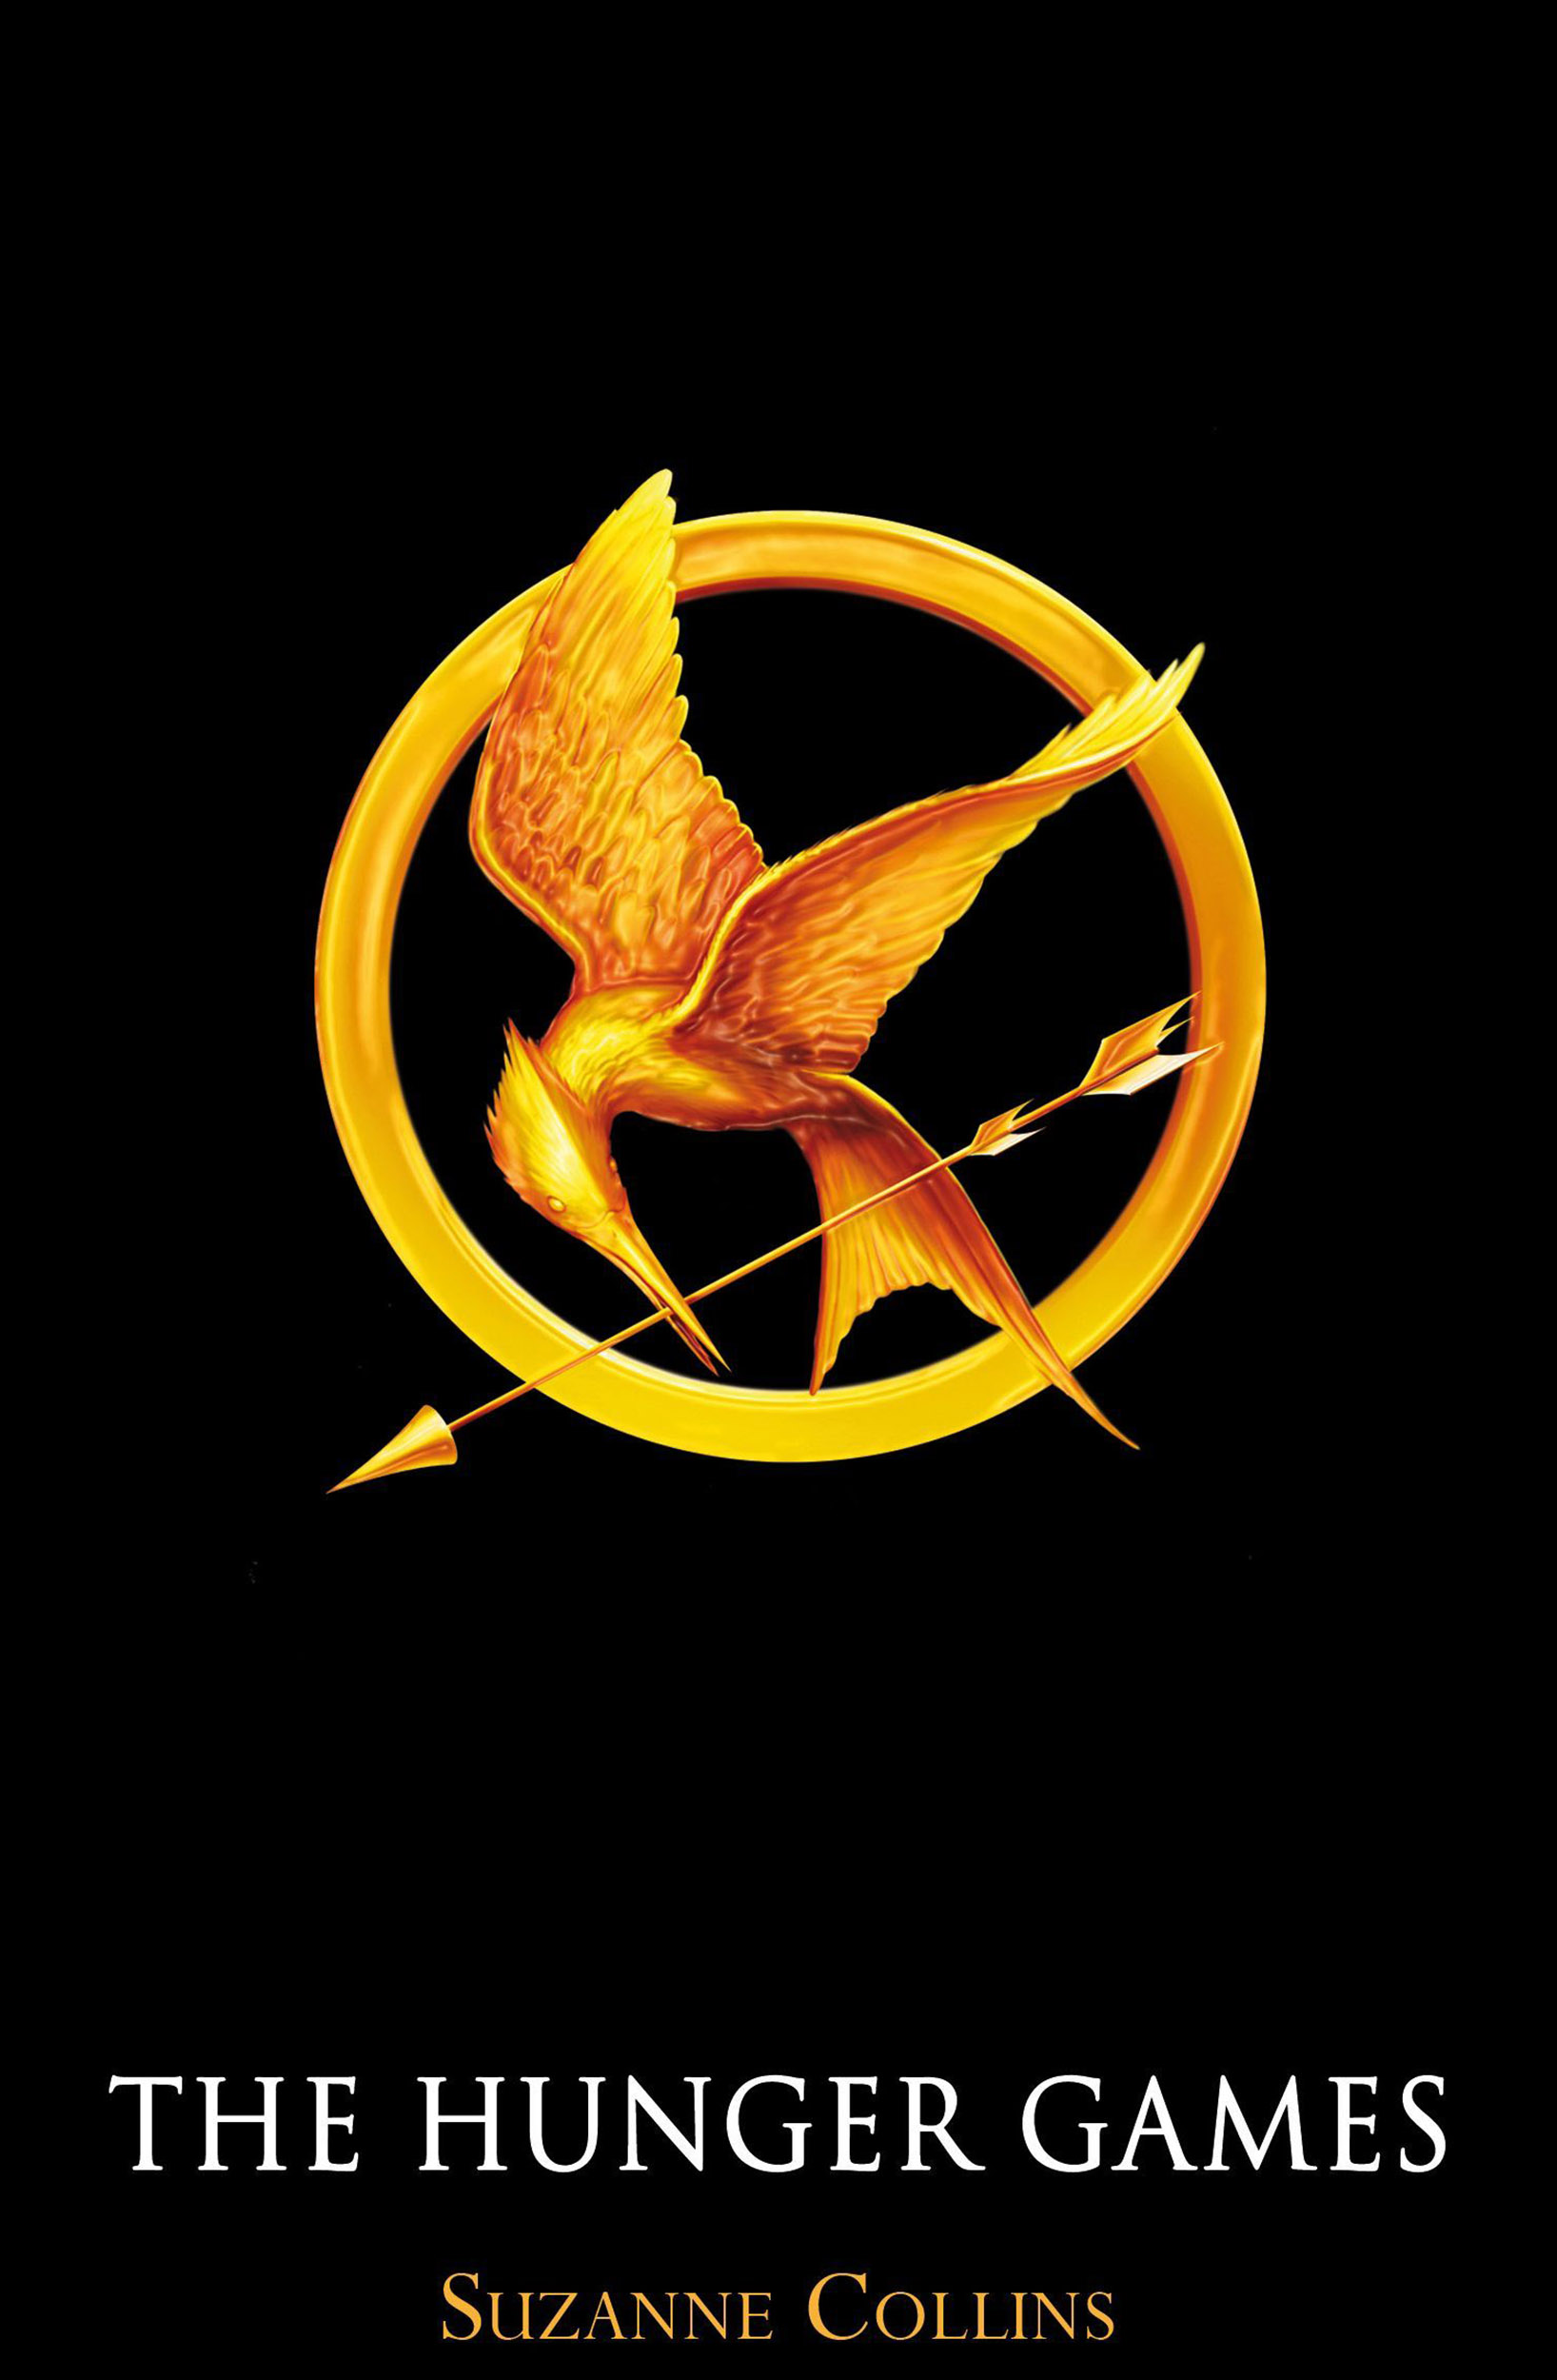 The Hunger Games Summary of Key Ideas and Review